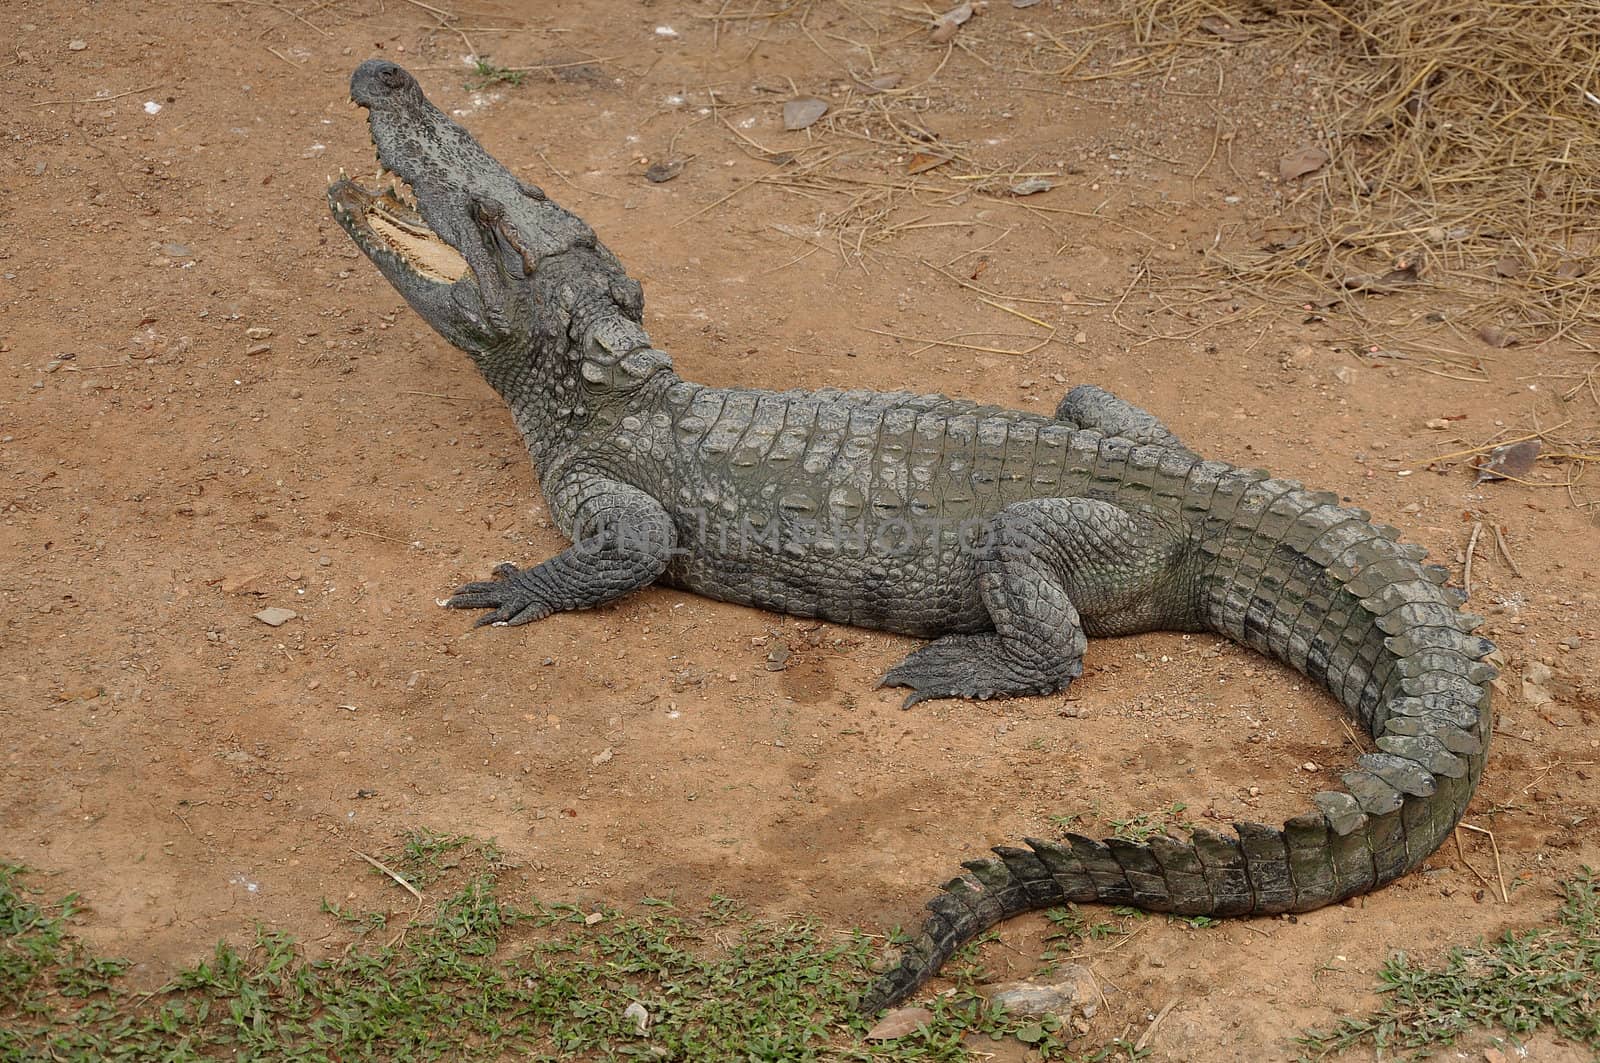 Siamese crocodile is a freshwater crocodile native to Indonesia (Borneo and possibly Java), Brunei, East Malaysia, Laos, Cambodia, Burma, Thailand, and Vietnam. The species is critically endangered and already extirpated from many regions.